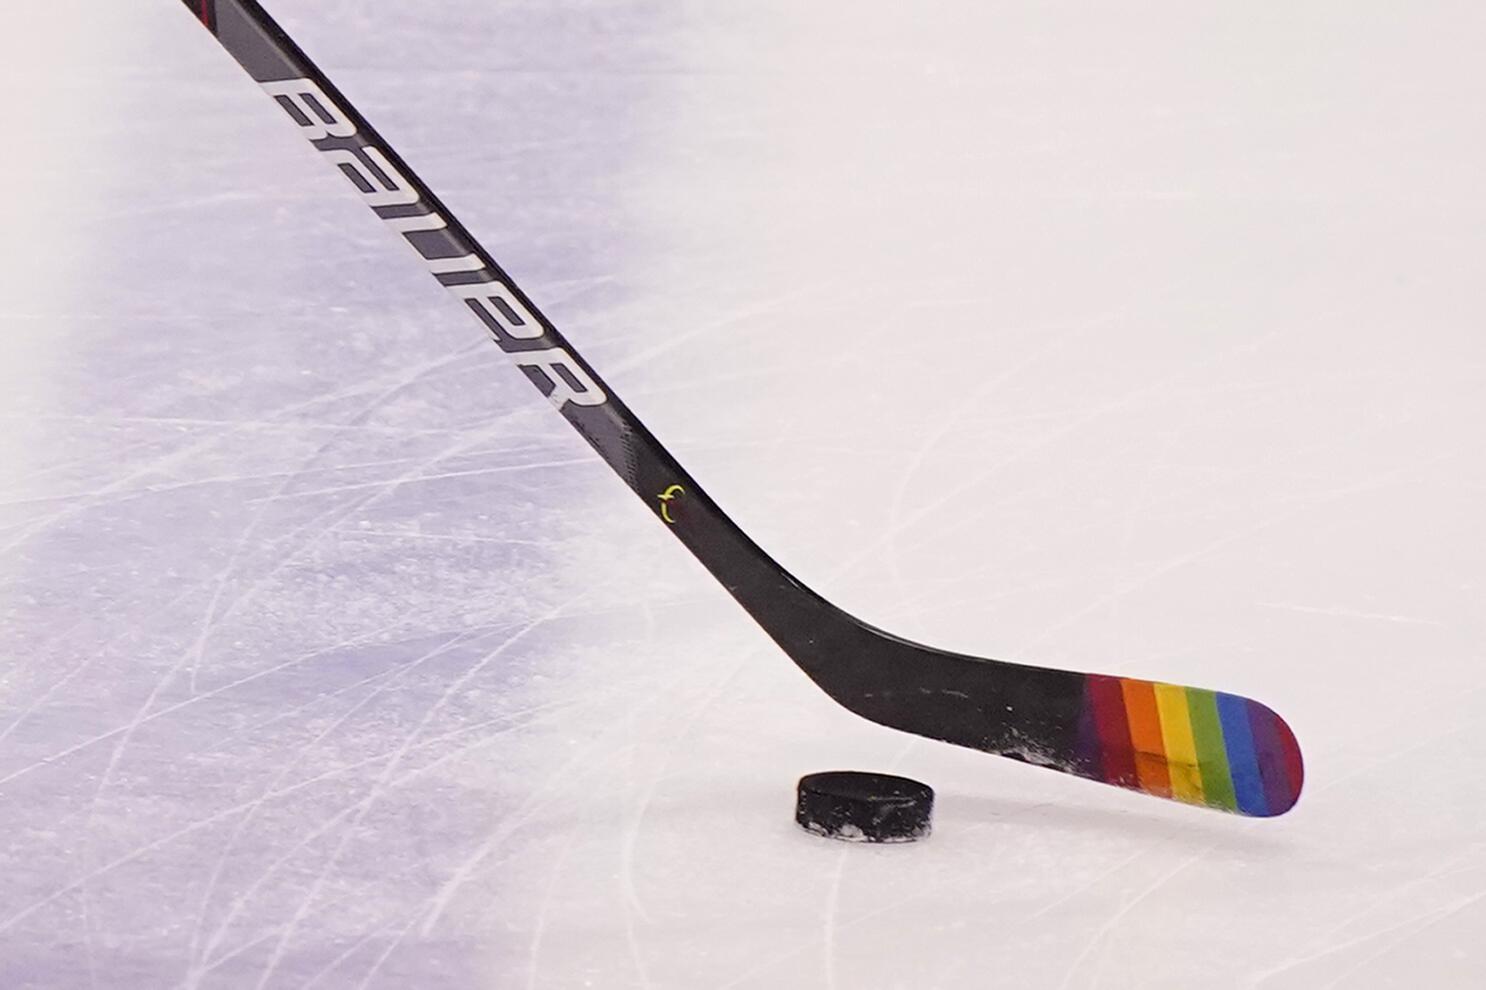 Flyers Player Ivan Provorov Boycotts Pride Night Citing His Religion